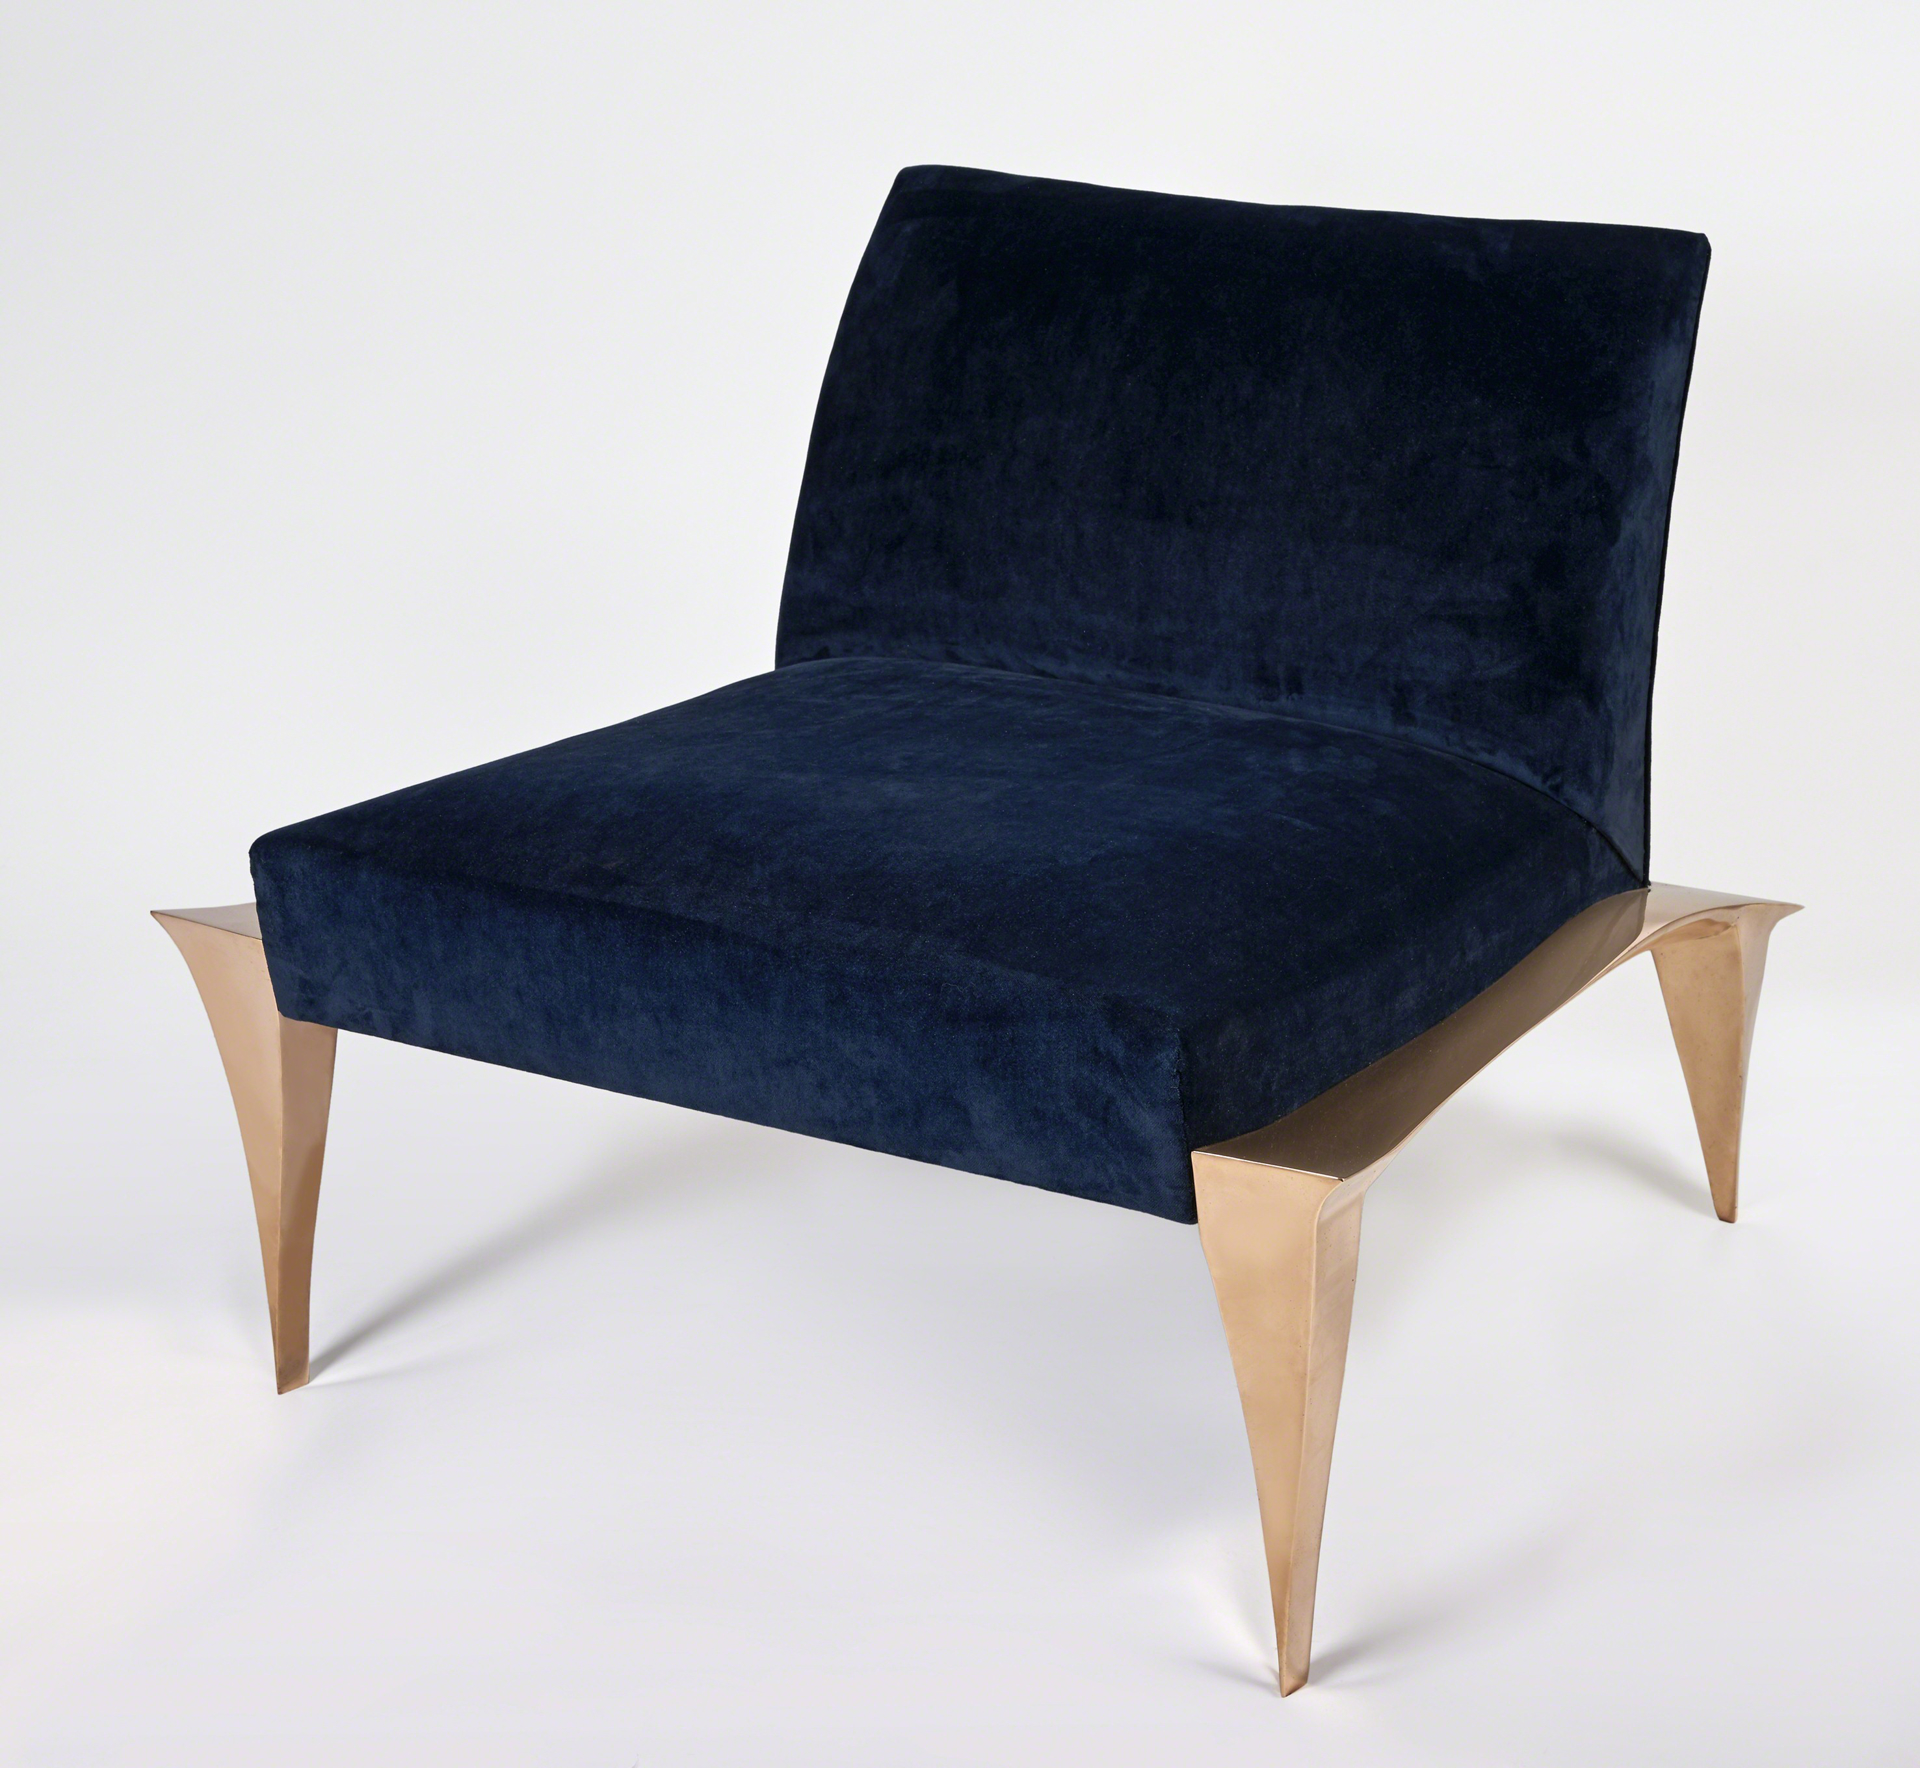 Bronze Armchair by Anasthasia Millot